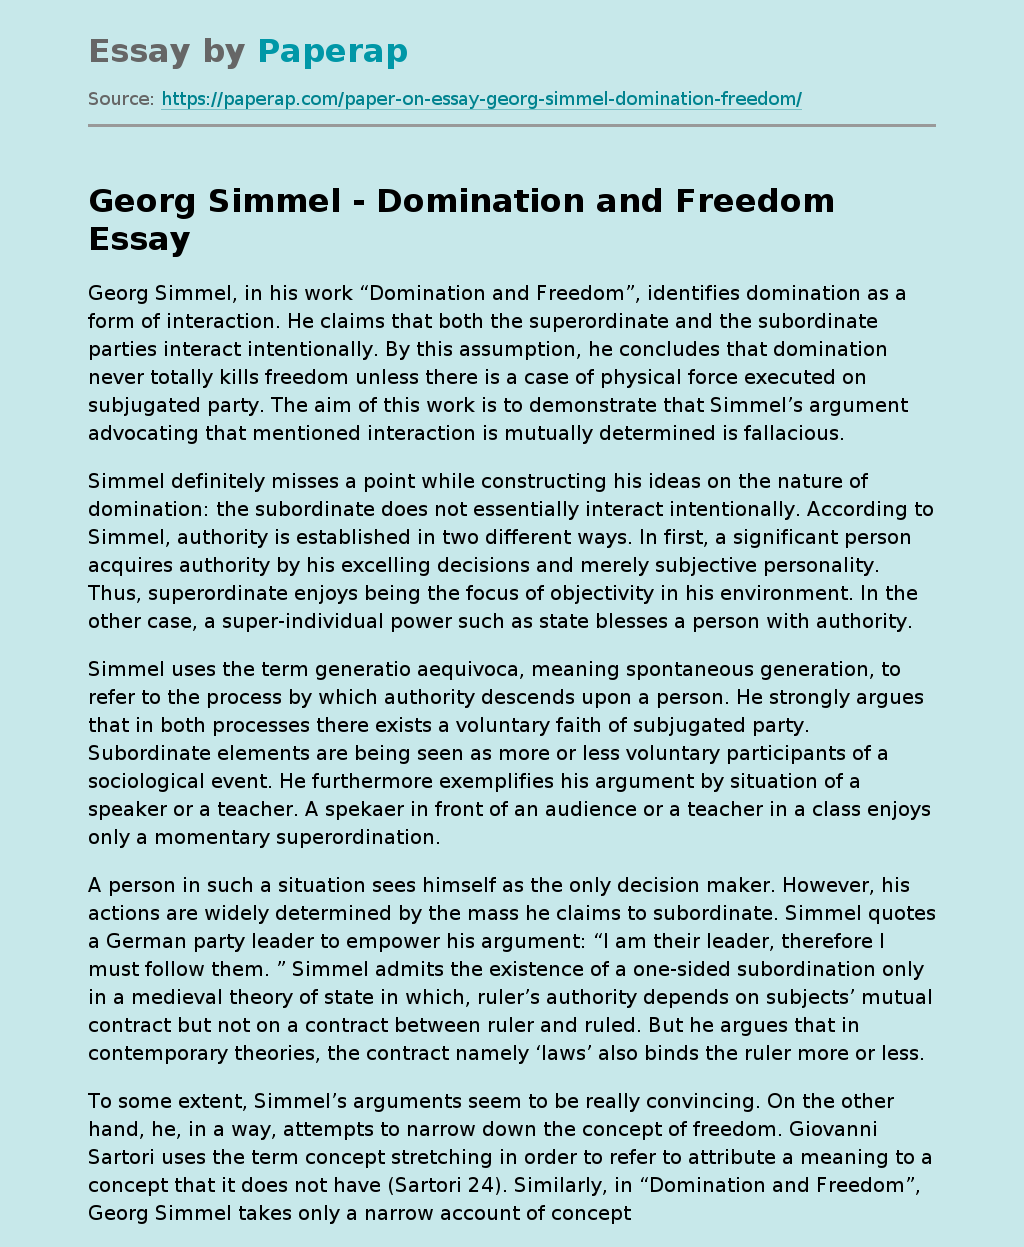 Georg Simmel - Domination and Freedom